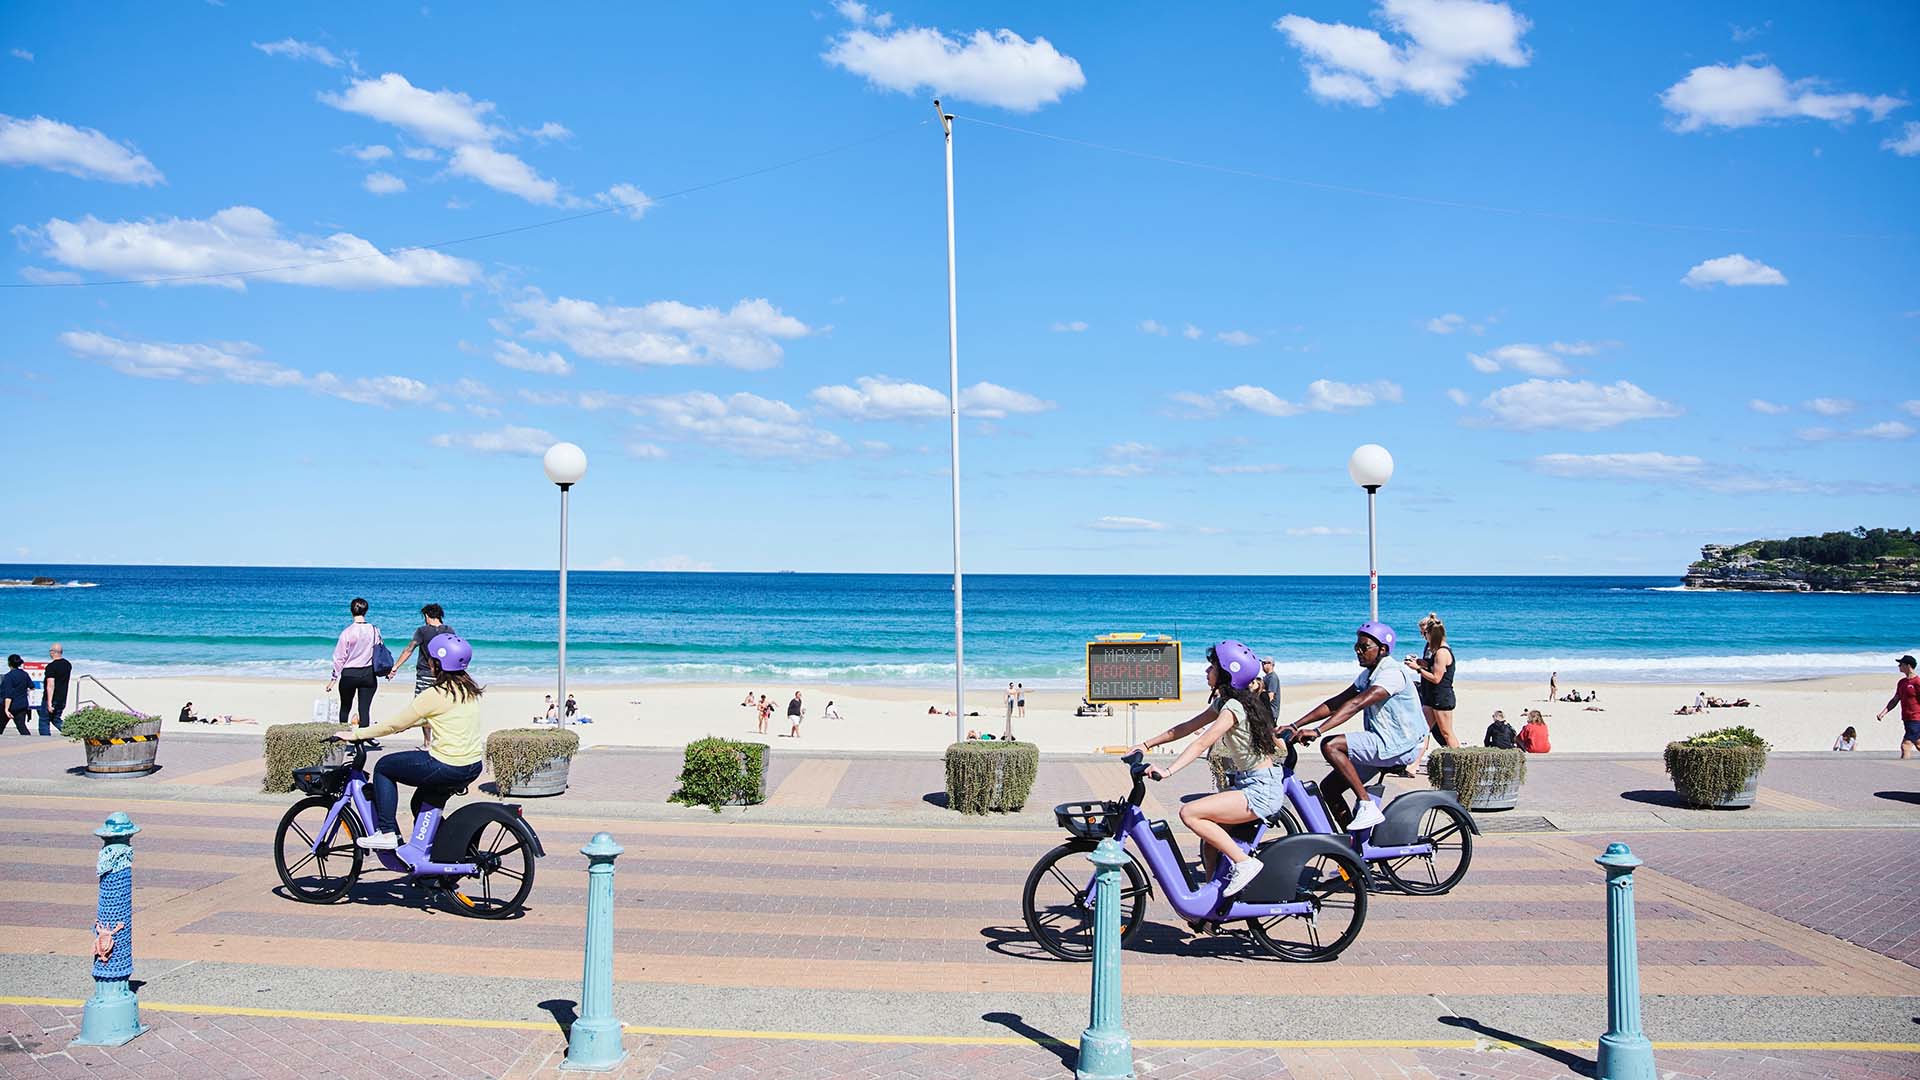 Beam Is Sydney's New Purple-Hued E-Bike Service with Designated Parking Spots